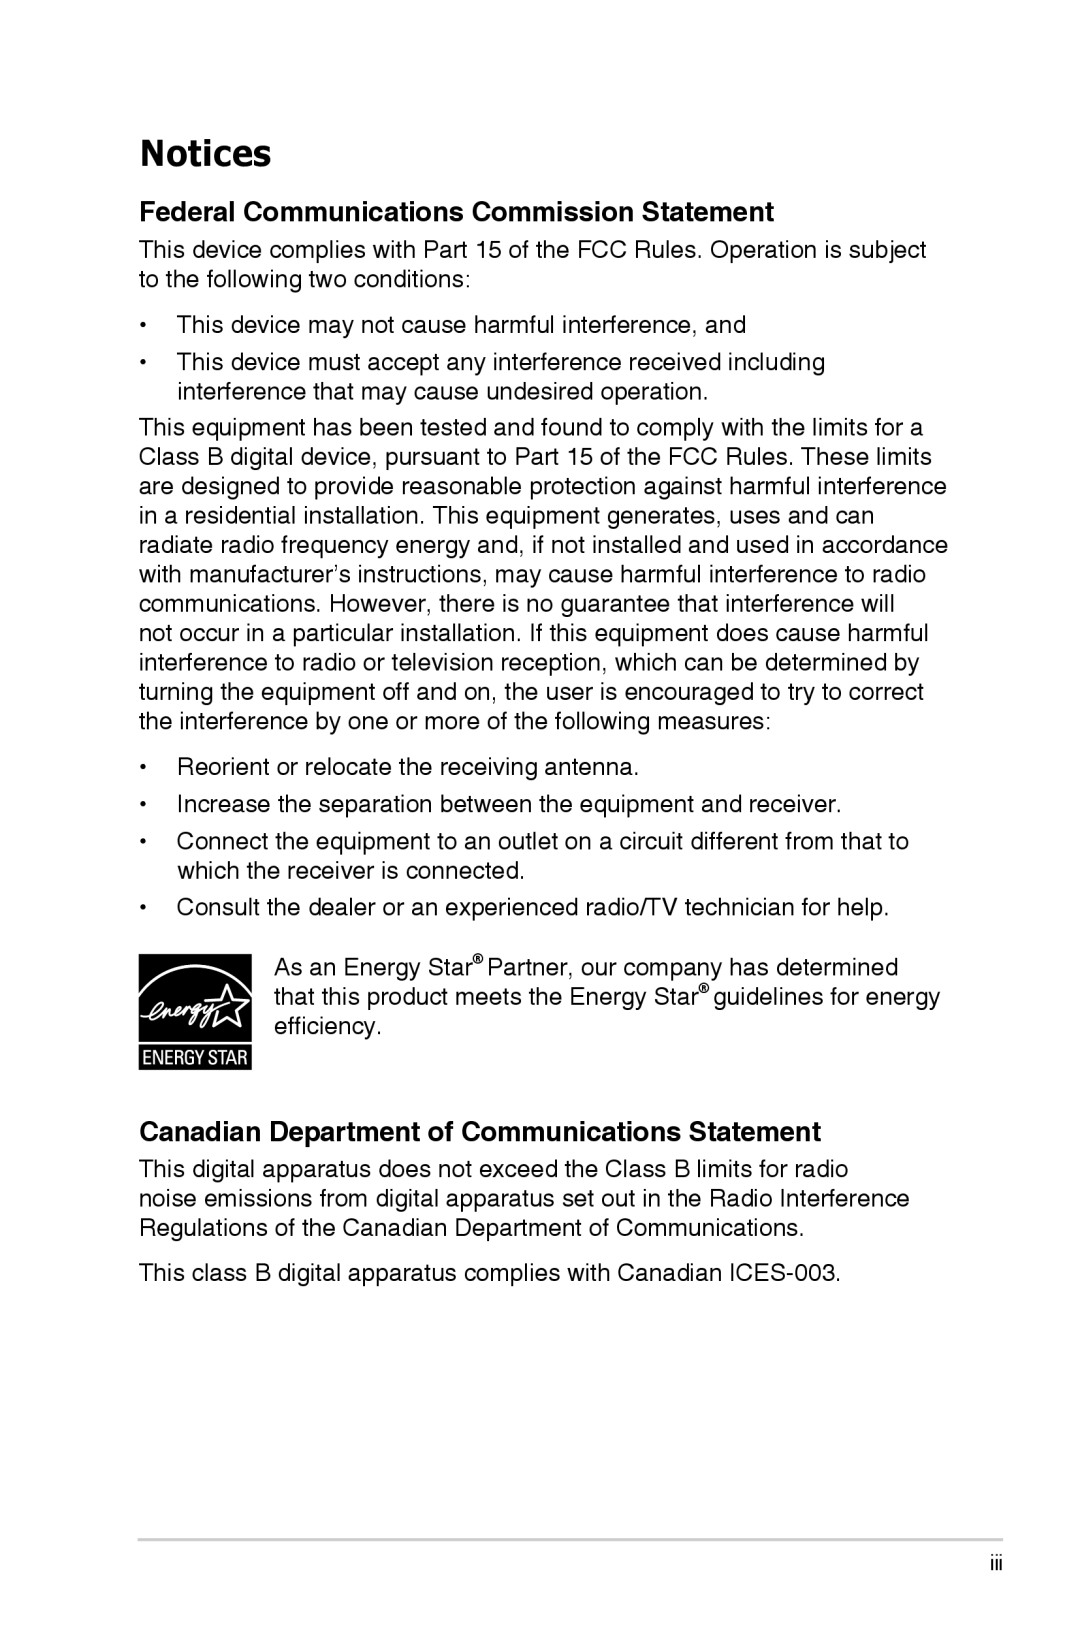 Asus PB298Q manual Notices, Federal Communications Commission Statement, Canadian Department of Communications Statement 